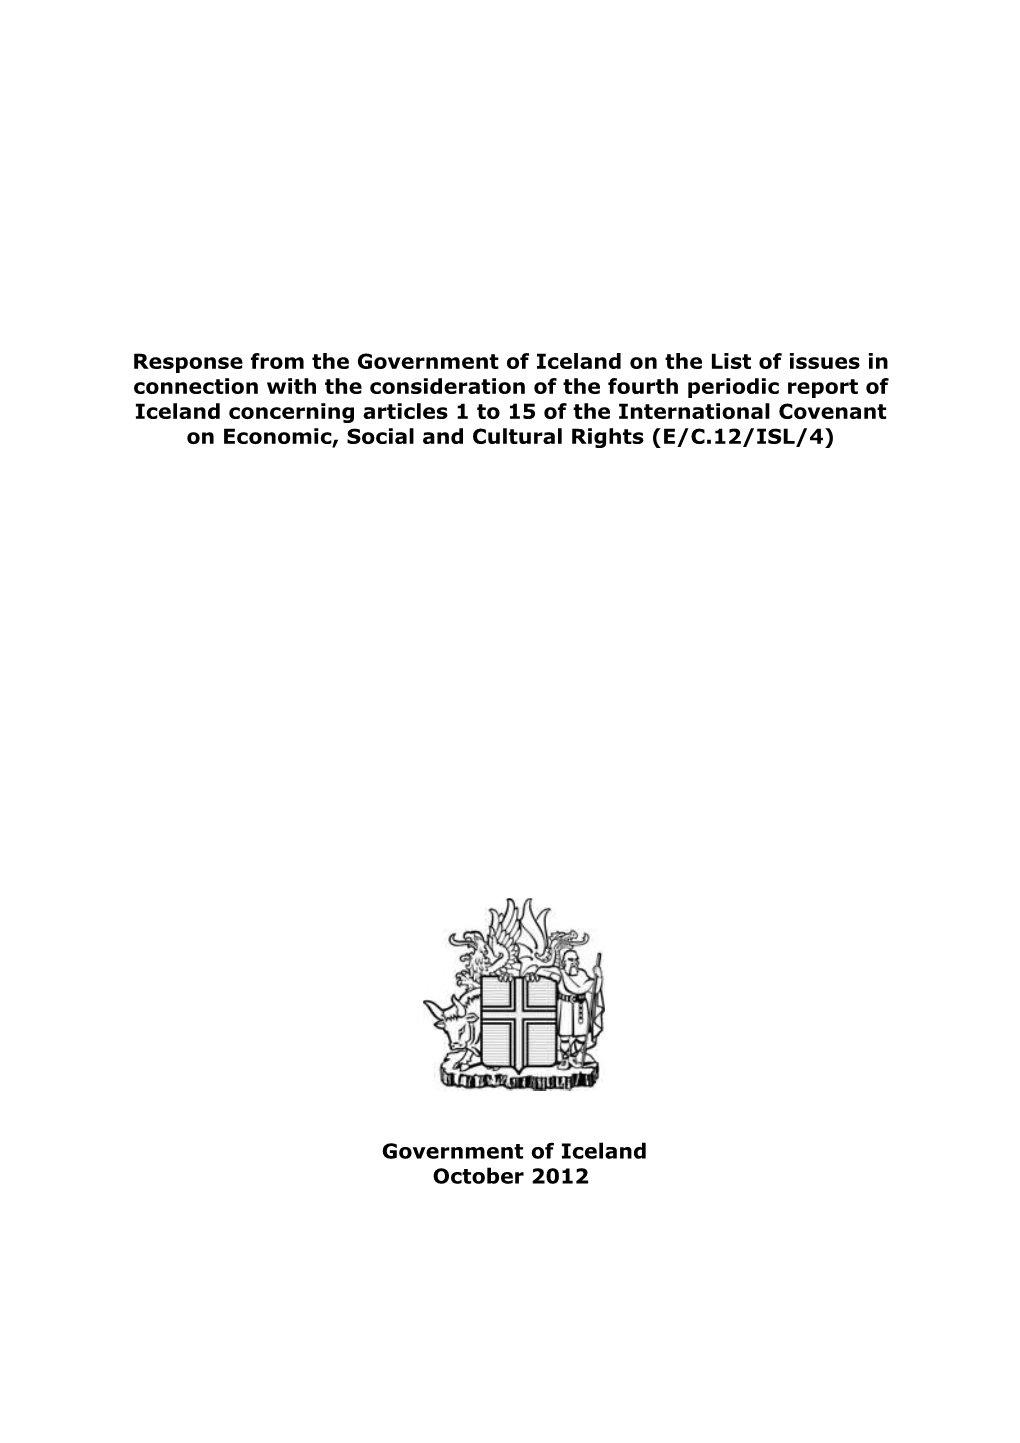 Response from the Government of Iceland on the List of Issues in Connection with The